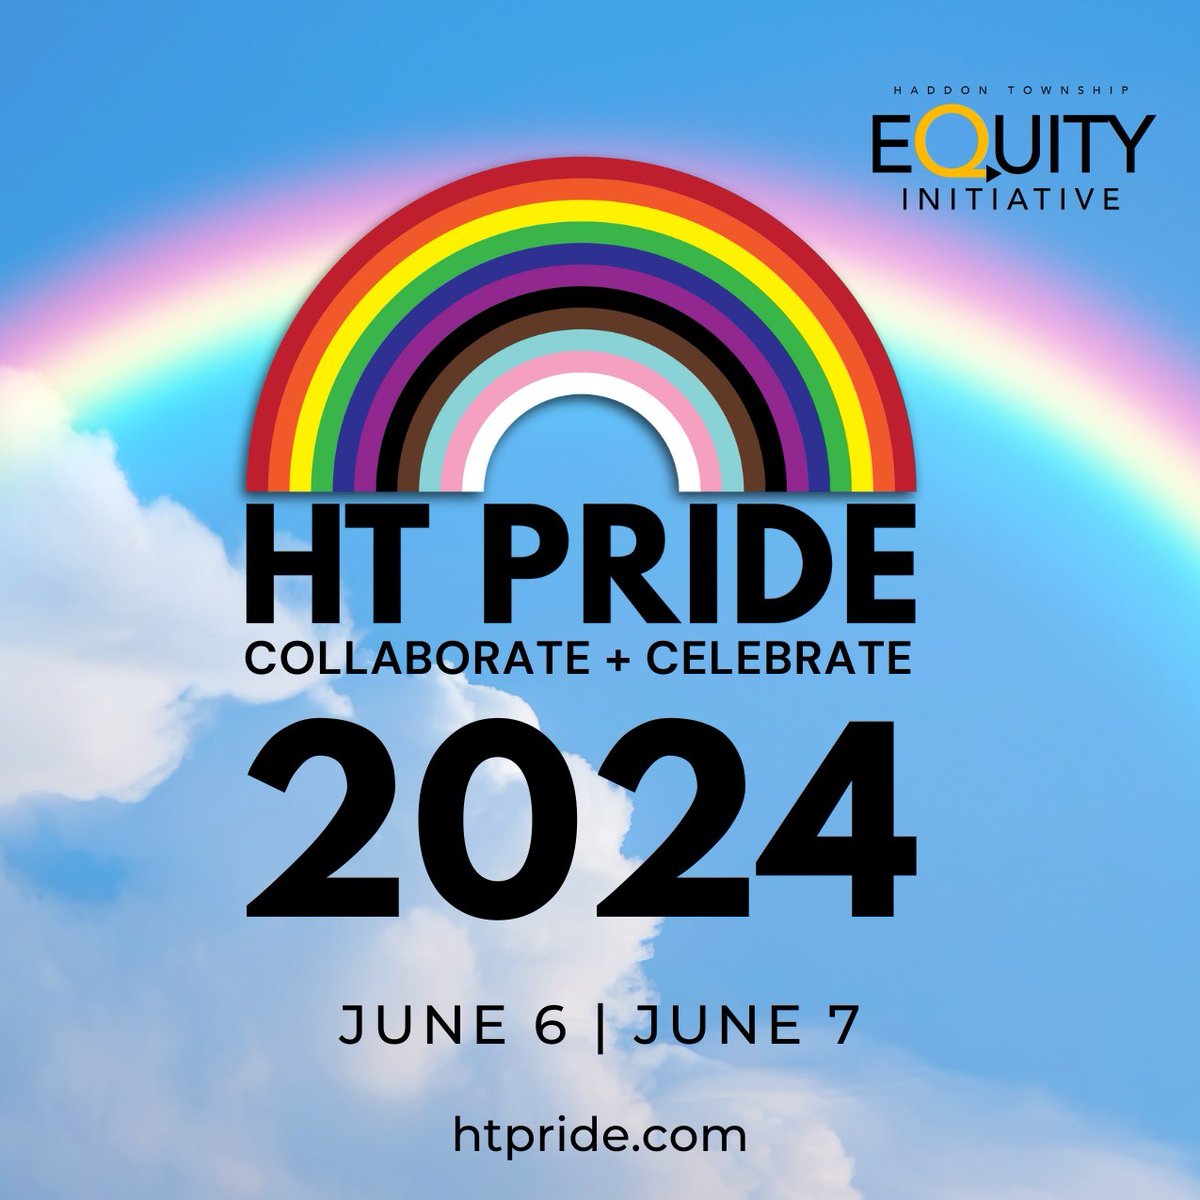 HT Pride Parade + Events returns NEXT WEEK 🏳️‍🌈🎉

Join us as we paint the town with rainbows and revel in the spirit of #HTPride in 2024!

Discover the events, activities, performers, sponsors, and find resources: htpride.com

#HTPride #HaddonTwp #Parade #LoveisLove